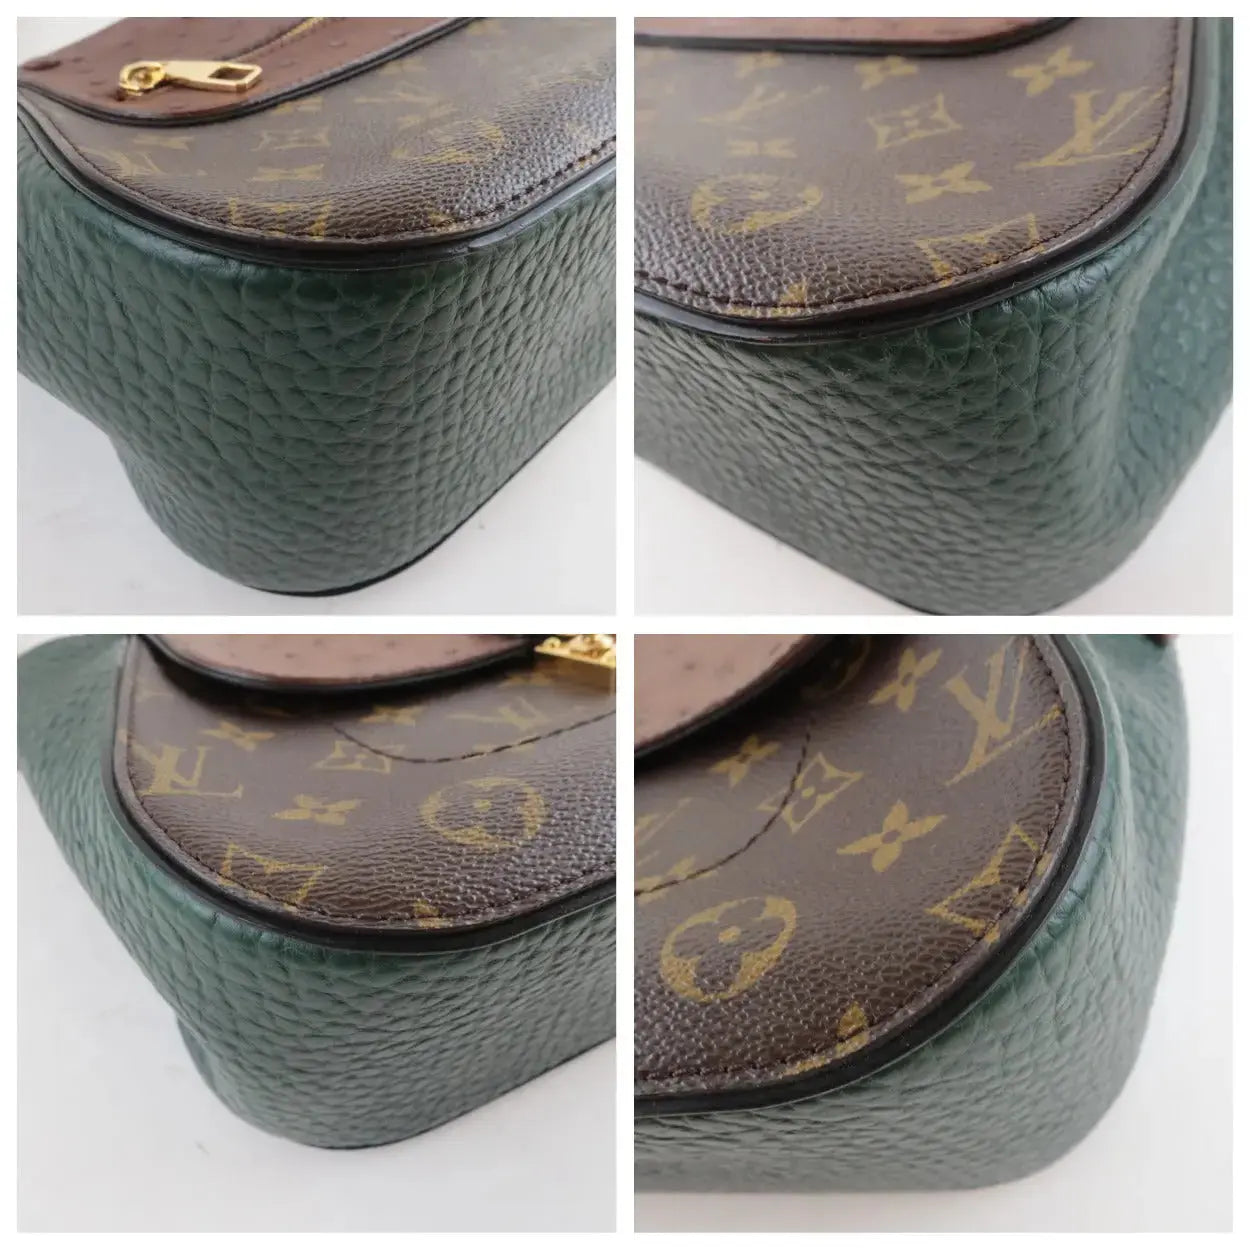 Louis Vuitton Limited Edition - Turquoise Exotic Ostrich Suede Monogram Logo Bag